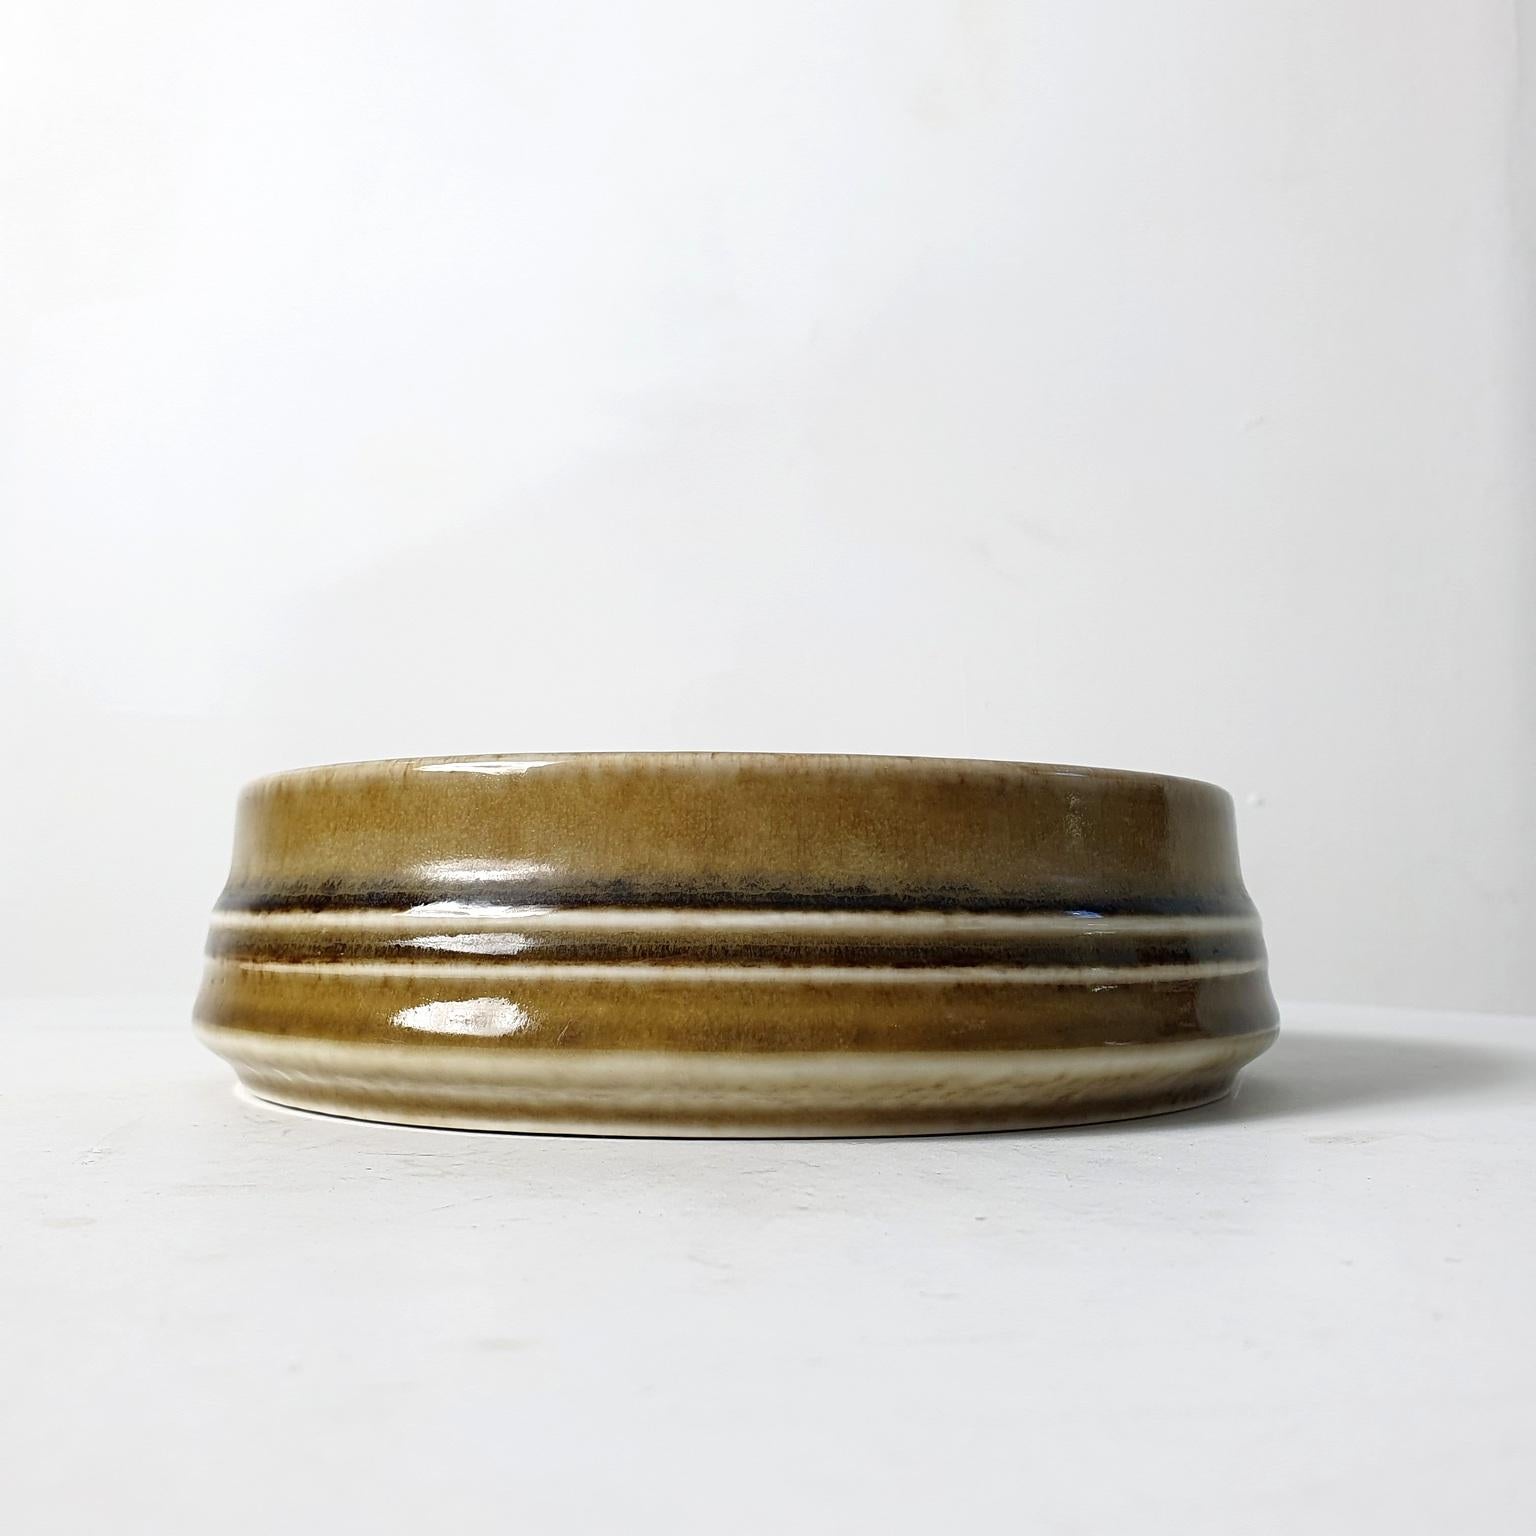 A medium sized bowl from the series 